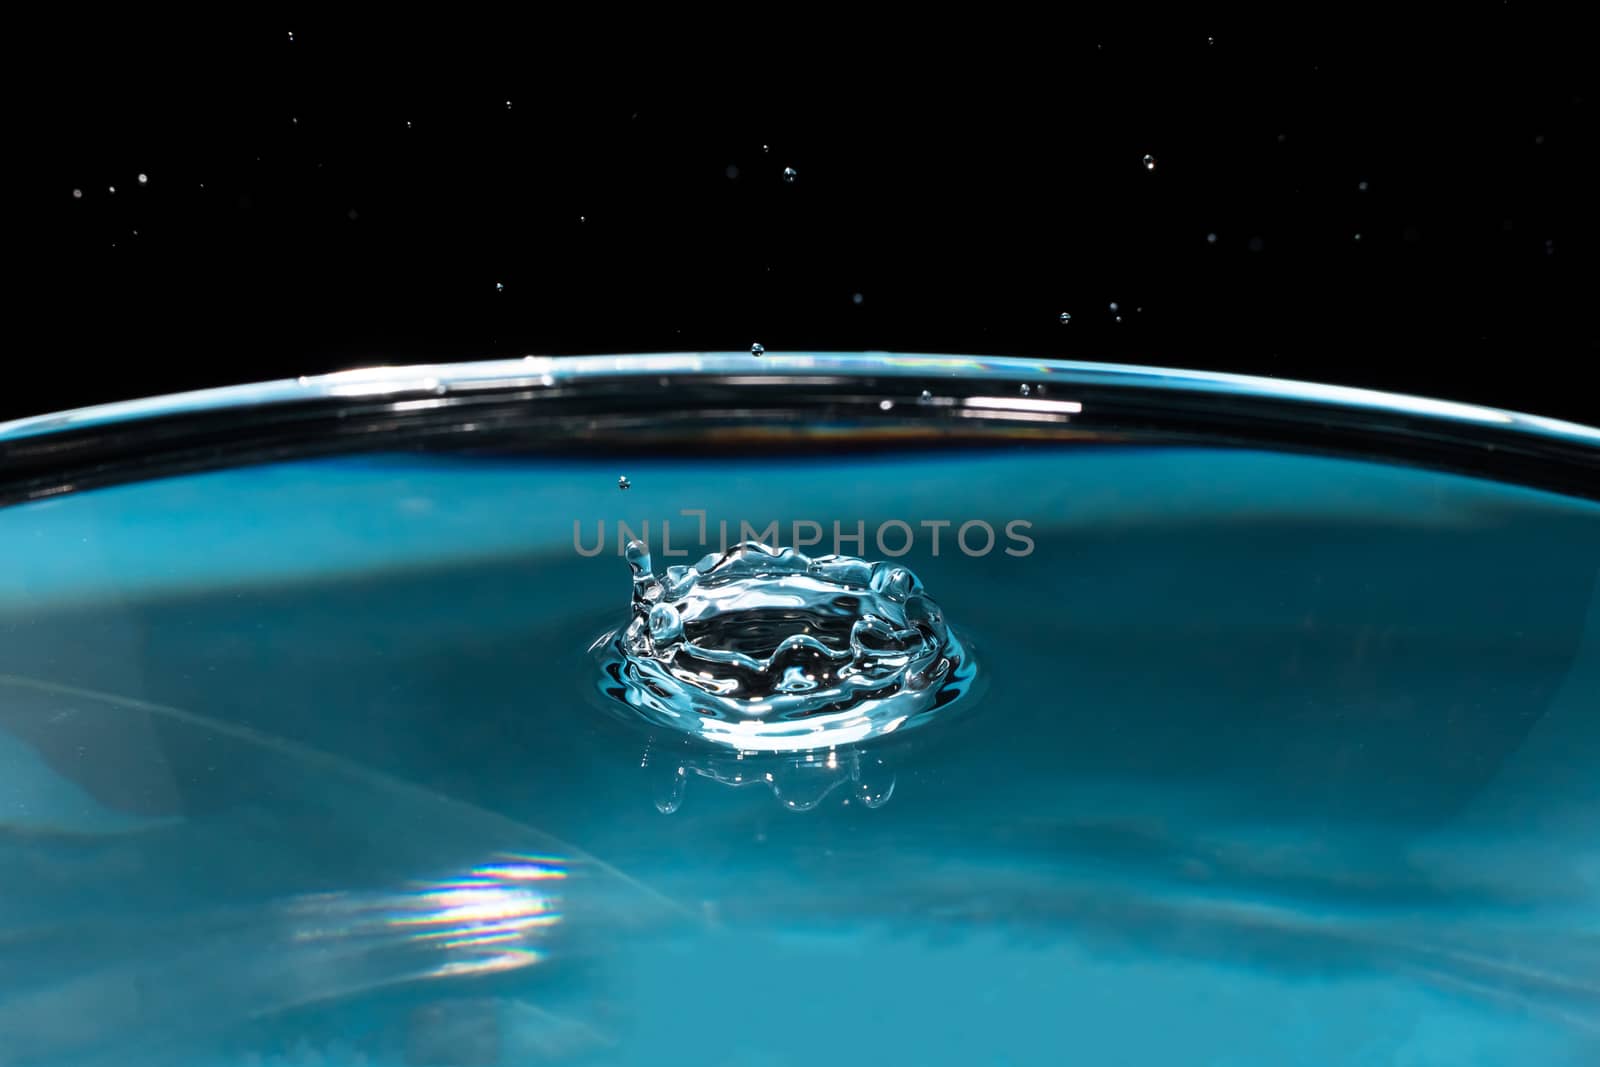 Abstract an outbreak of crown water.Splash of water close up.Frozen water drop photographed at high speed.Slow dripping of liquid with air bubbles.Nature backgrounds or Wallpaper.Frozen liquid splash